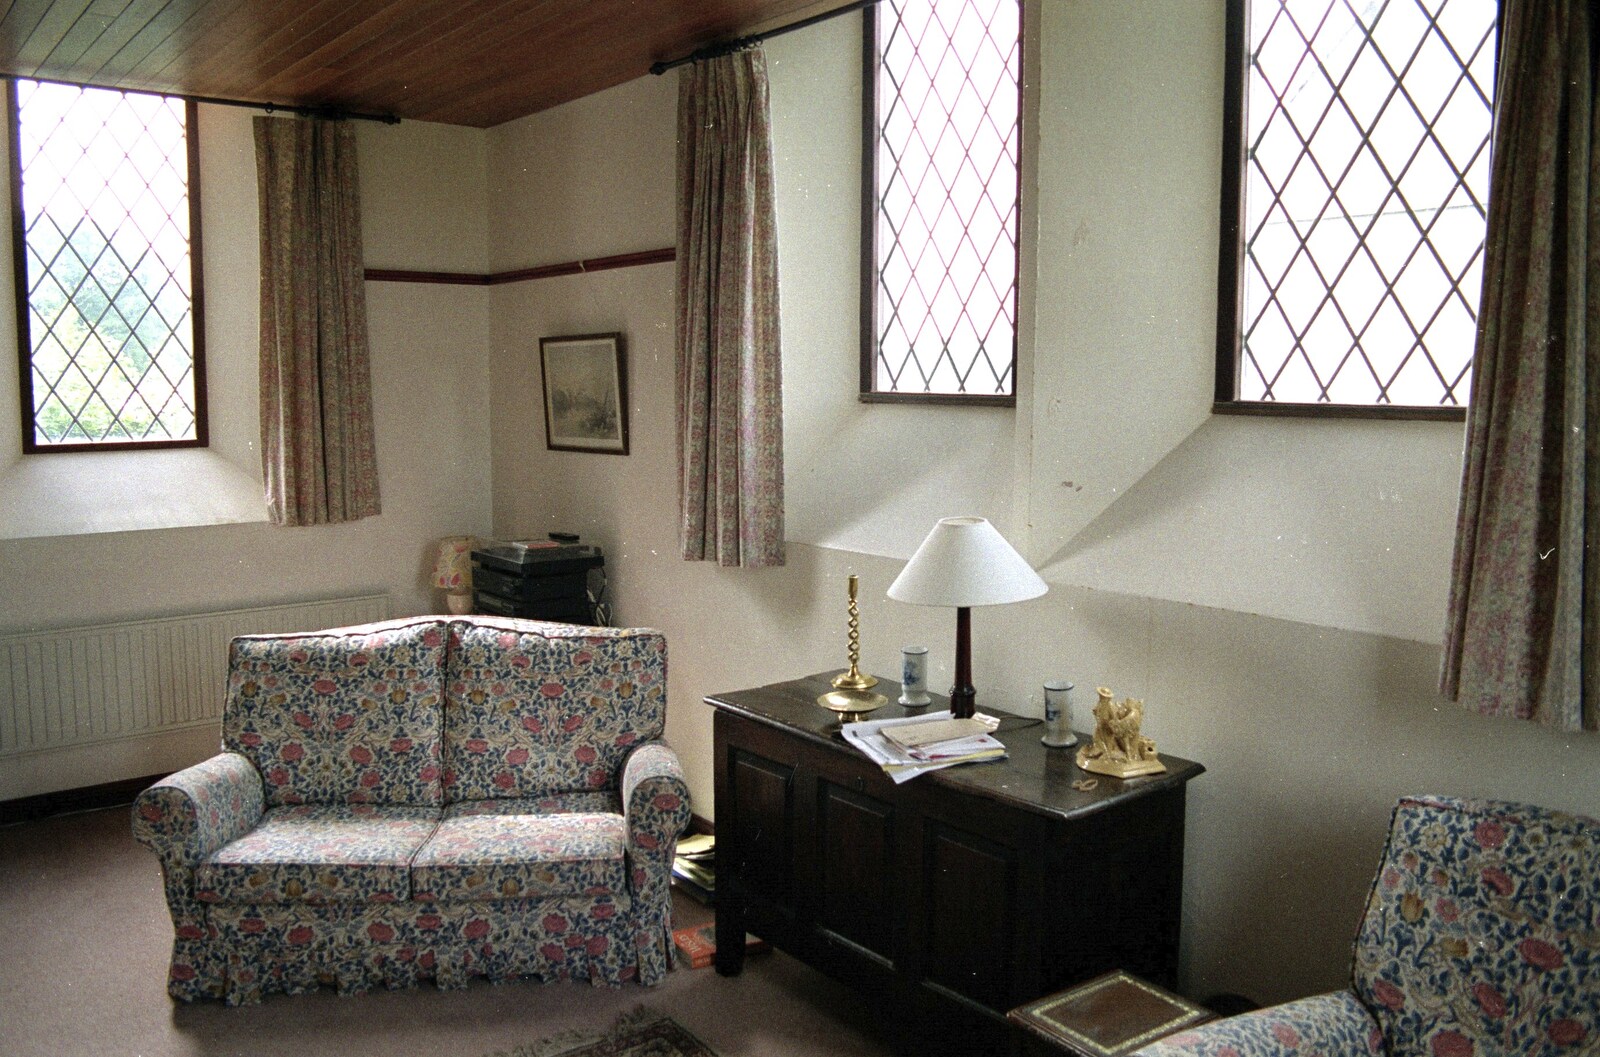 The lounge from Plymouth and The Chapel, Hoo Meavy, Devon - 25th July 1991